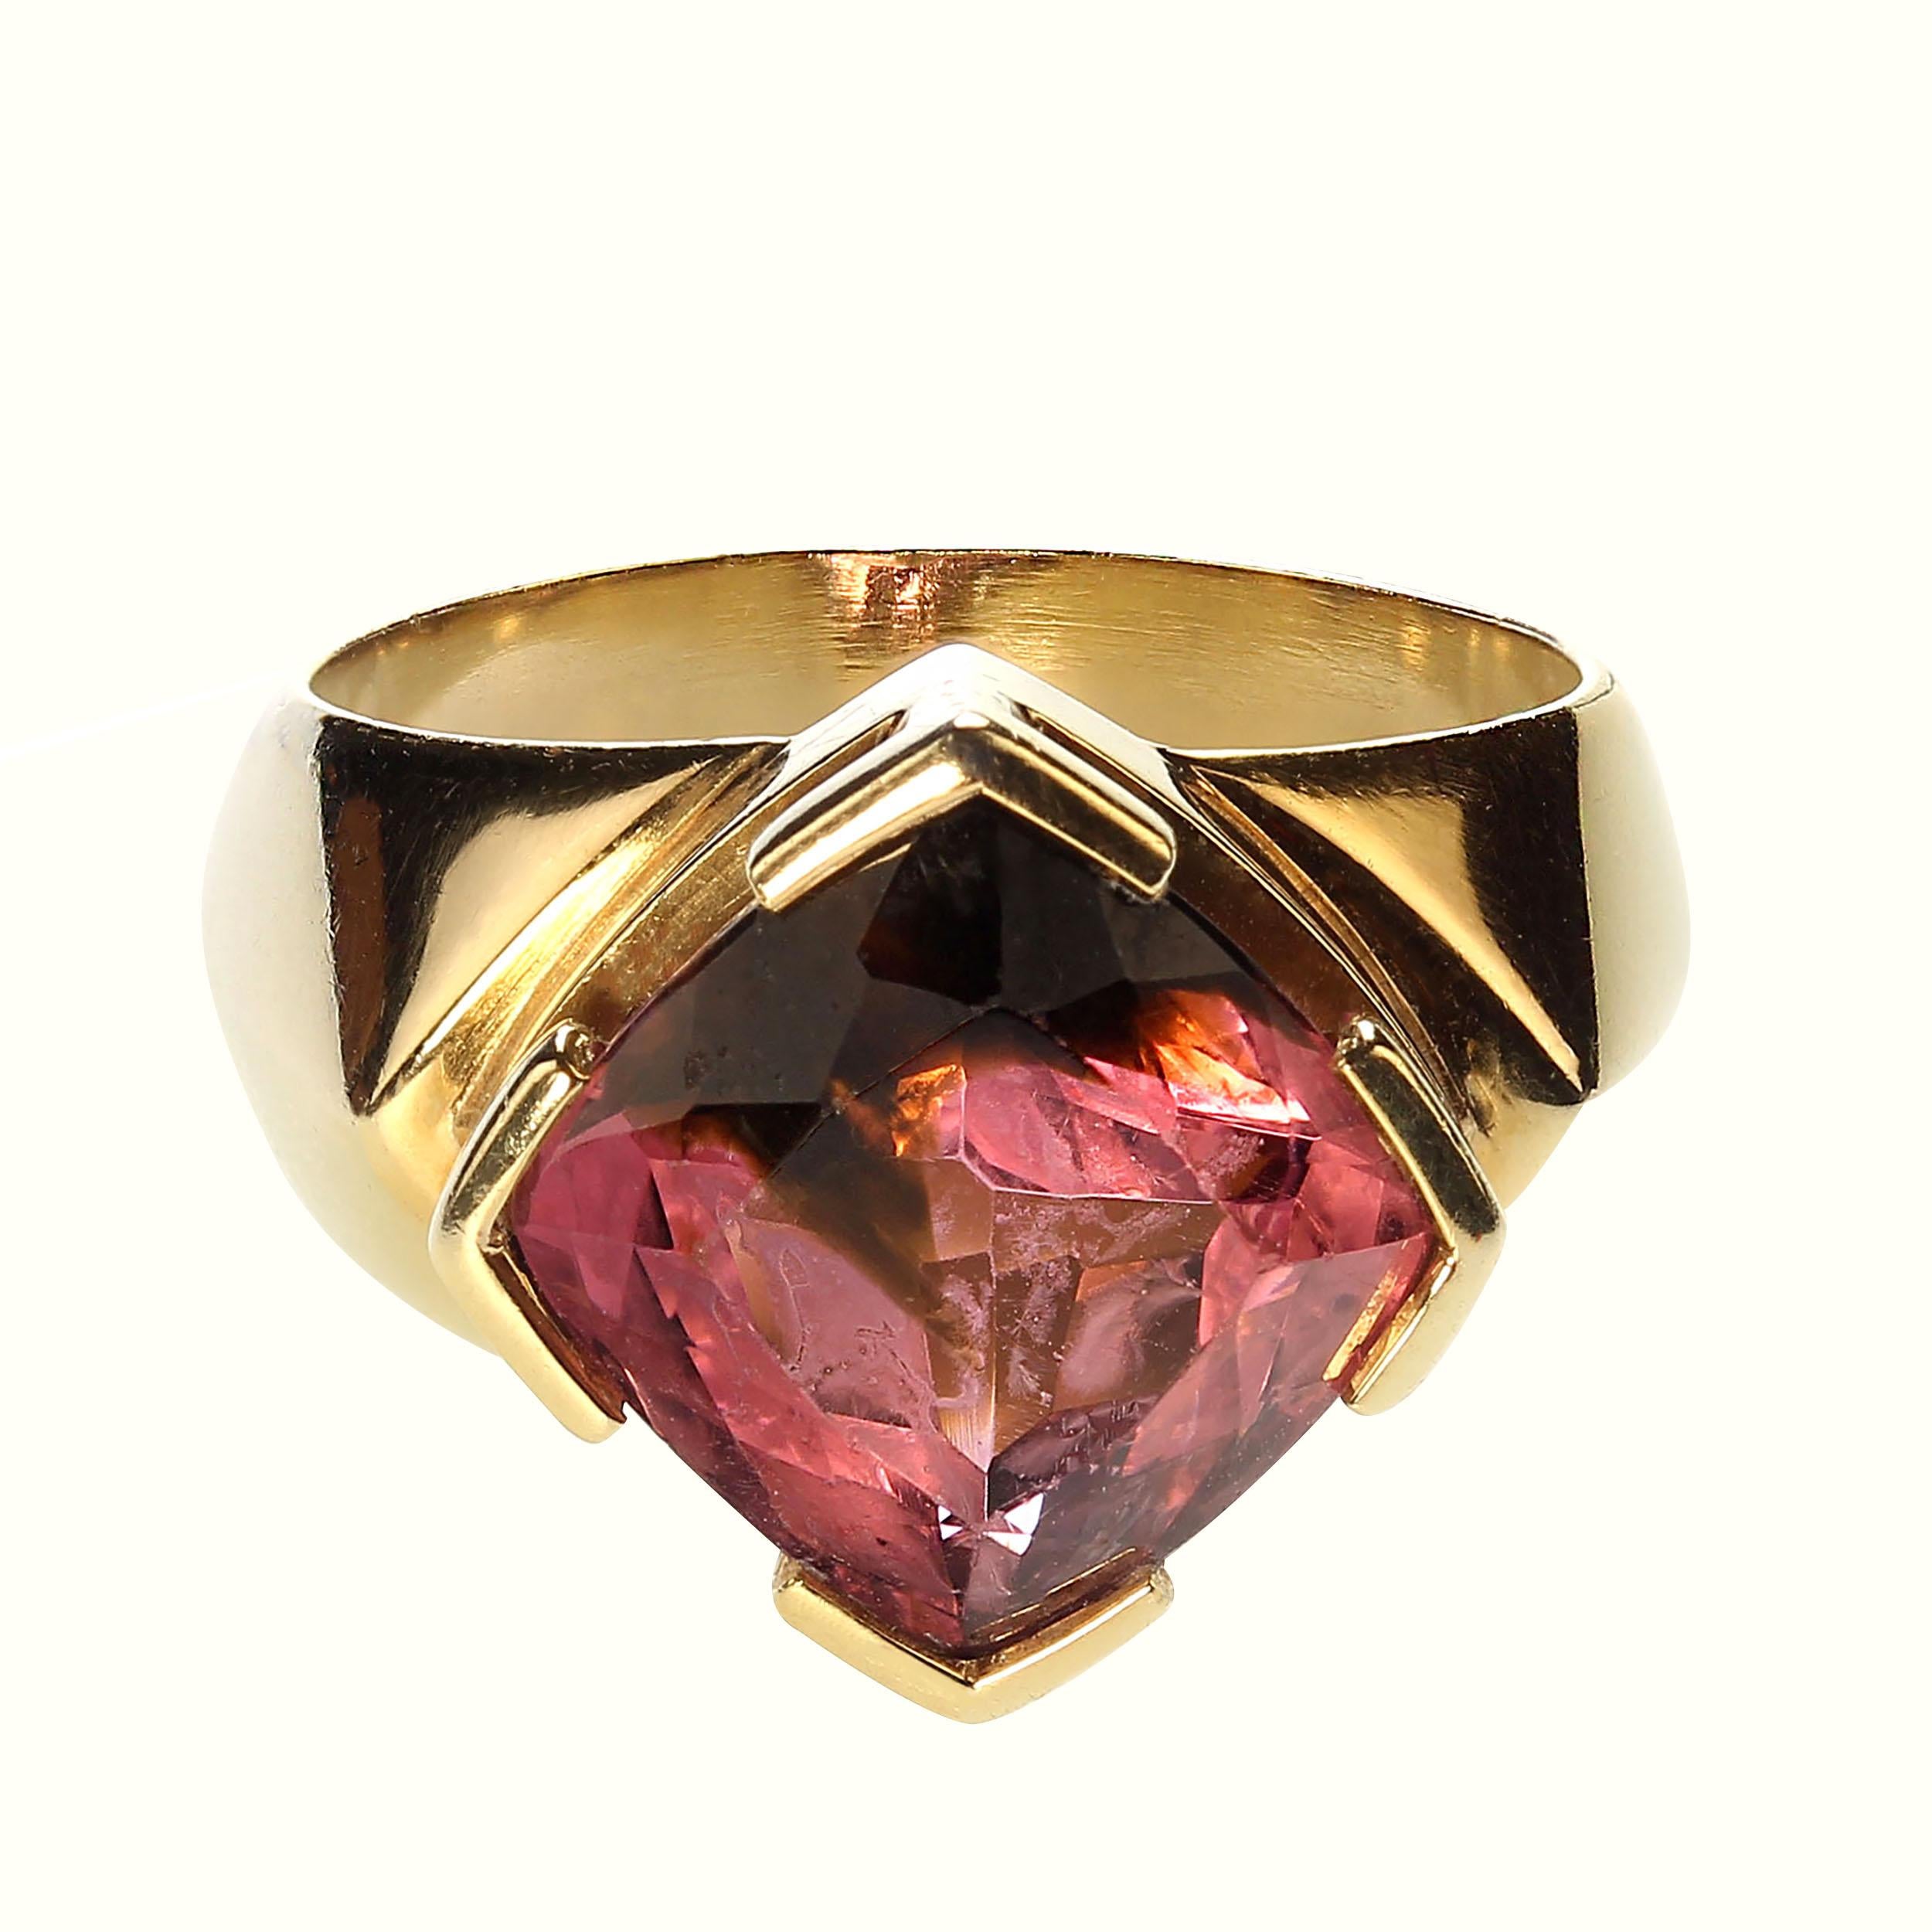 Cushion Cut AJD Delightful Pink & Green Tourmaline in 18K Yellow Ring Perfect Gift  For Sale